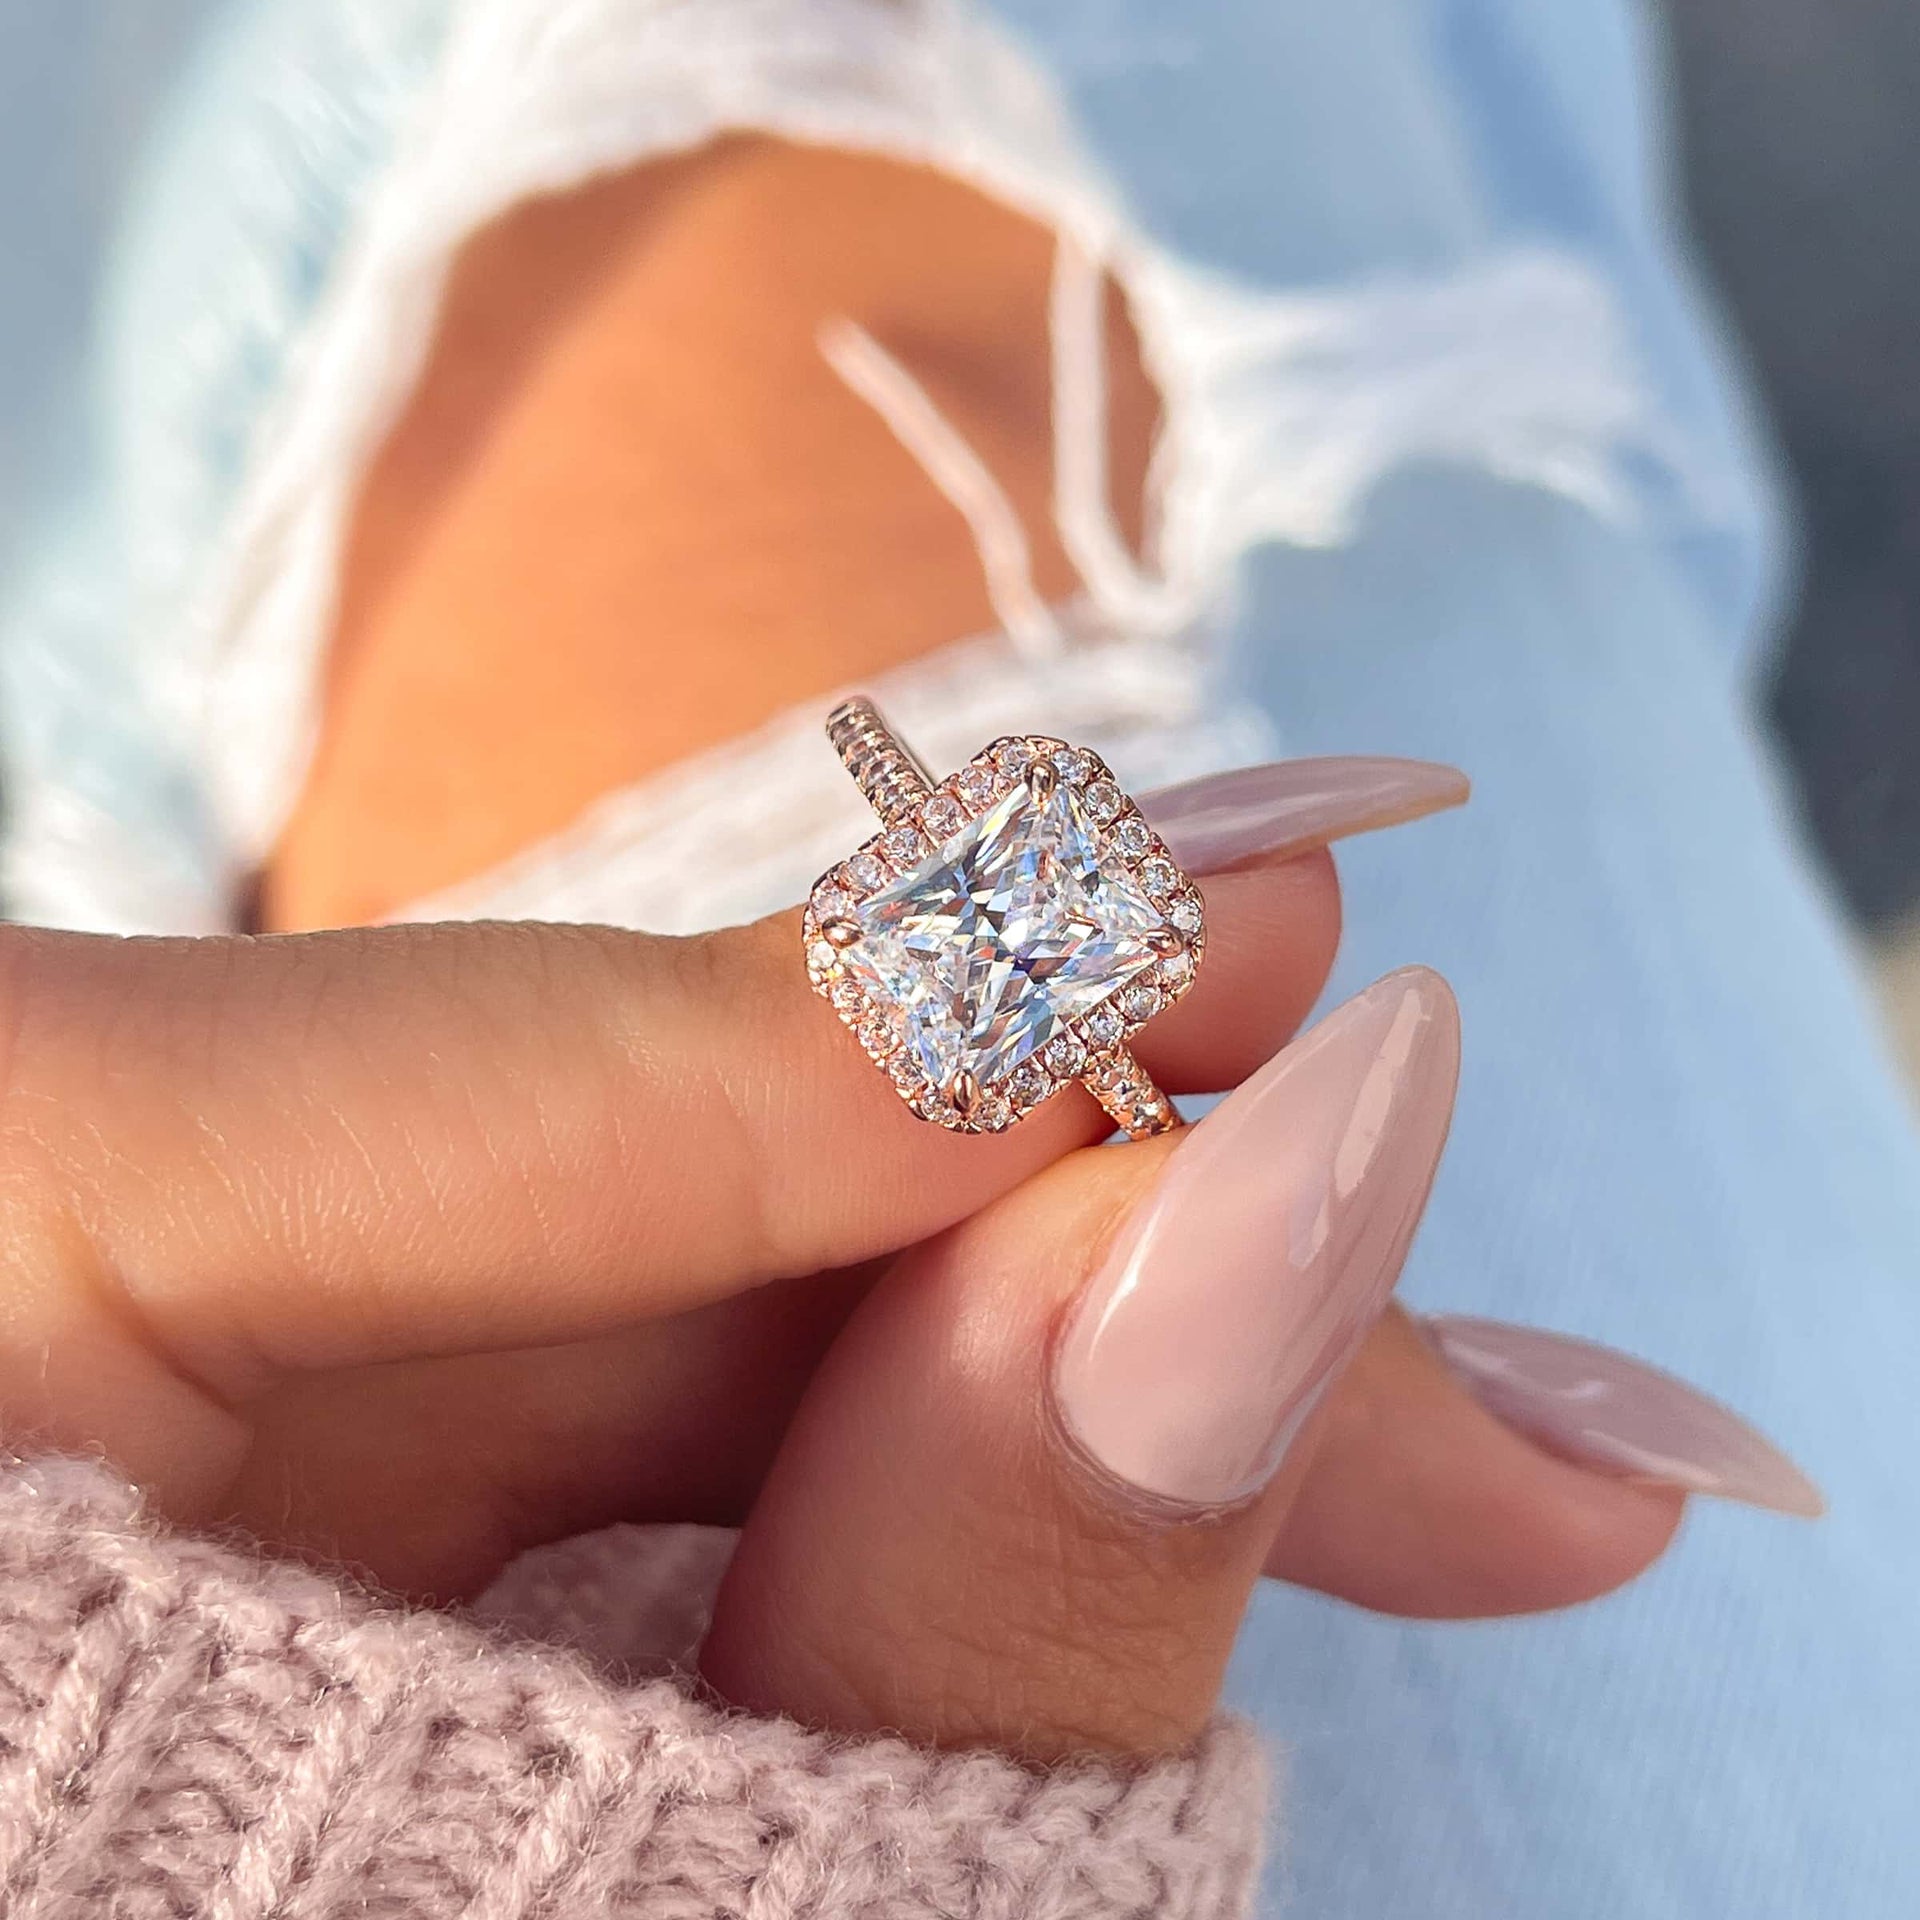 classic rose gold radiant cut halo engagement ring modeled on female hand with pink sweater and ripped light wash jeans